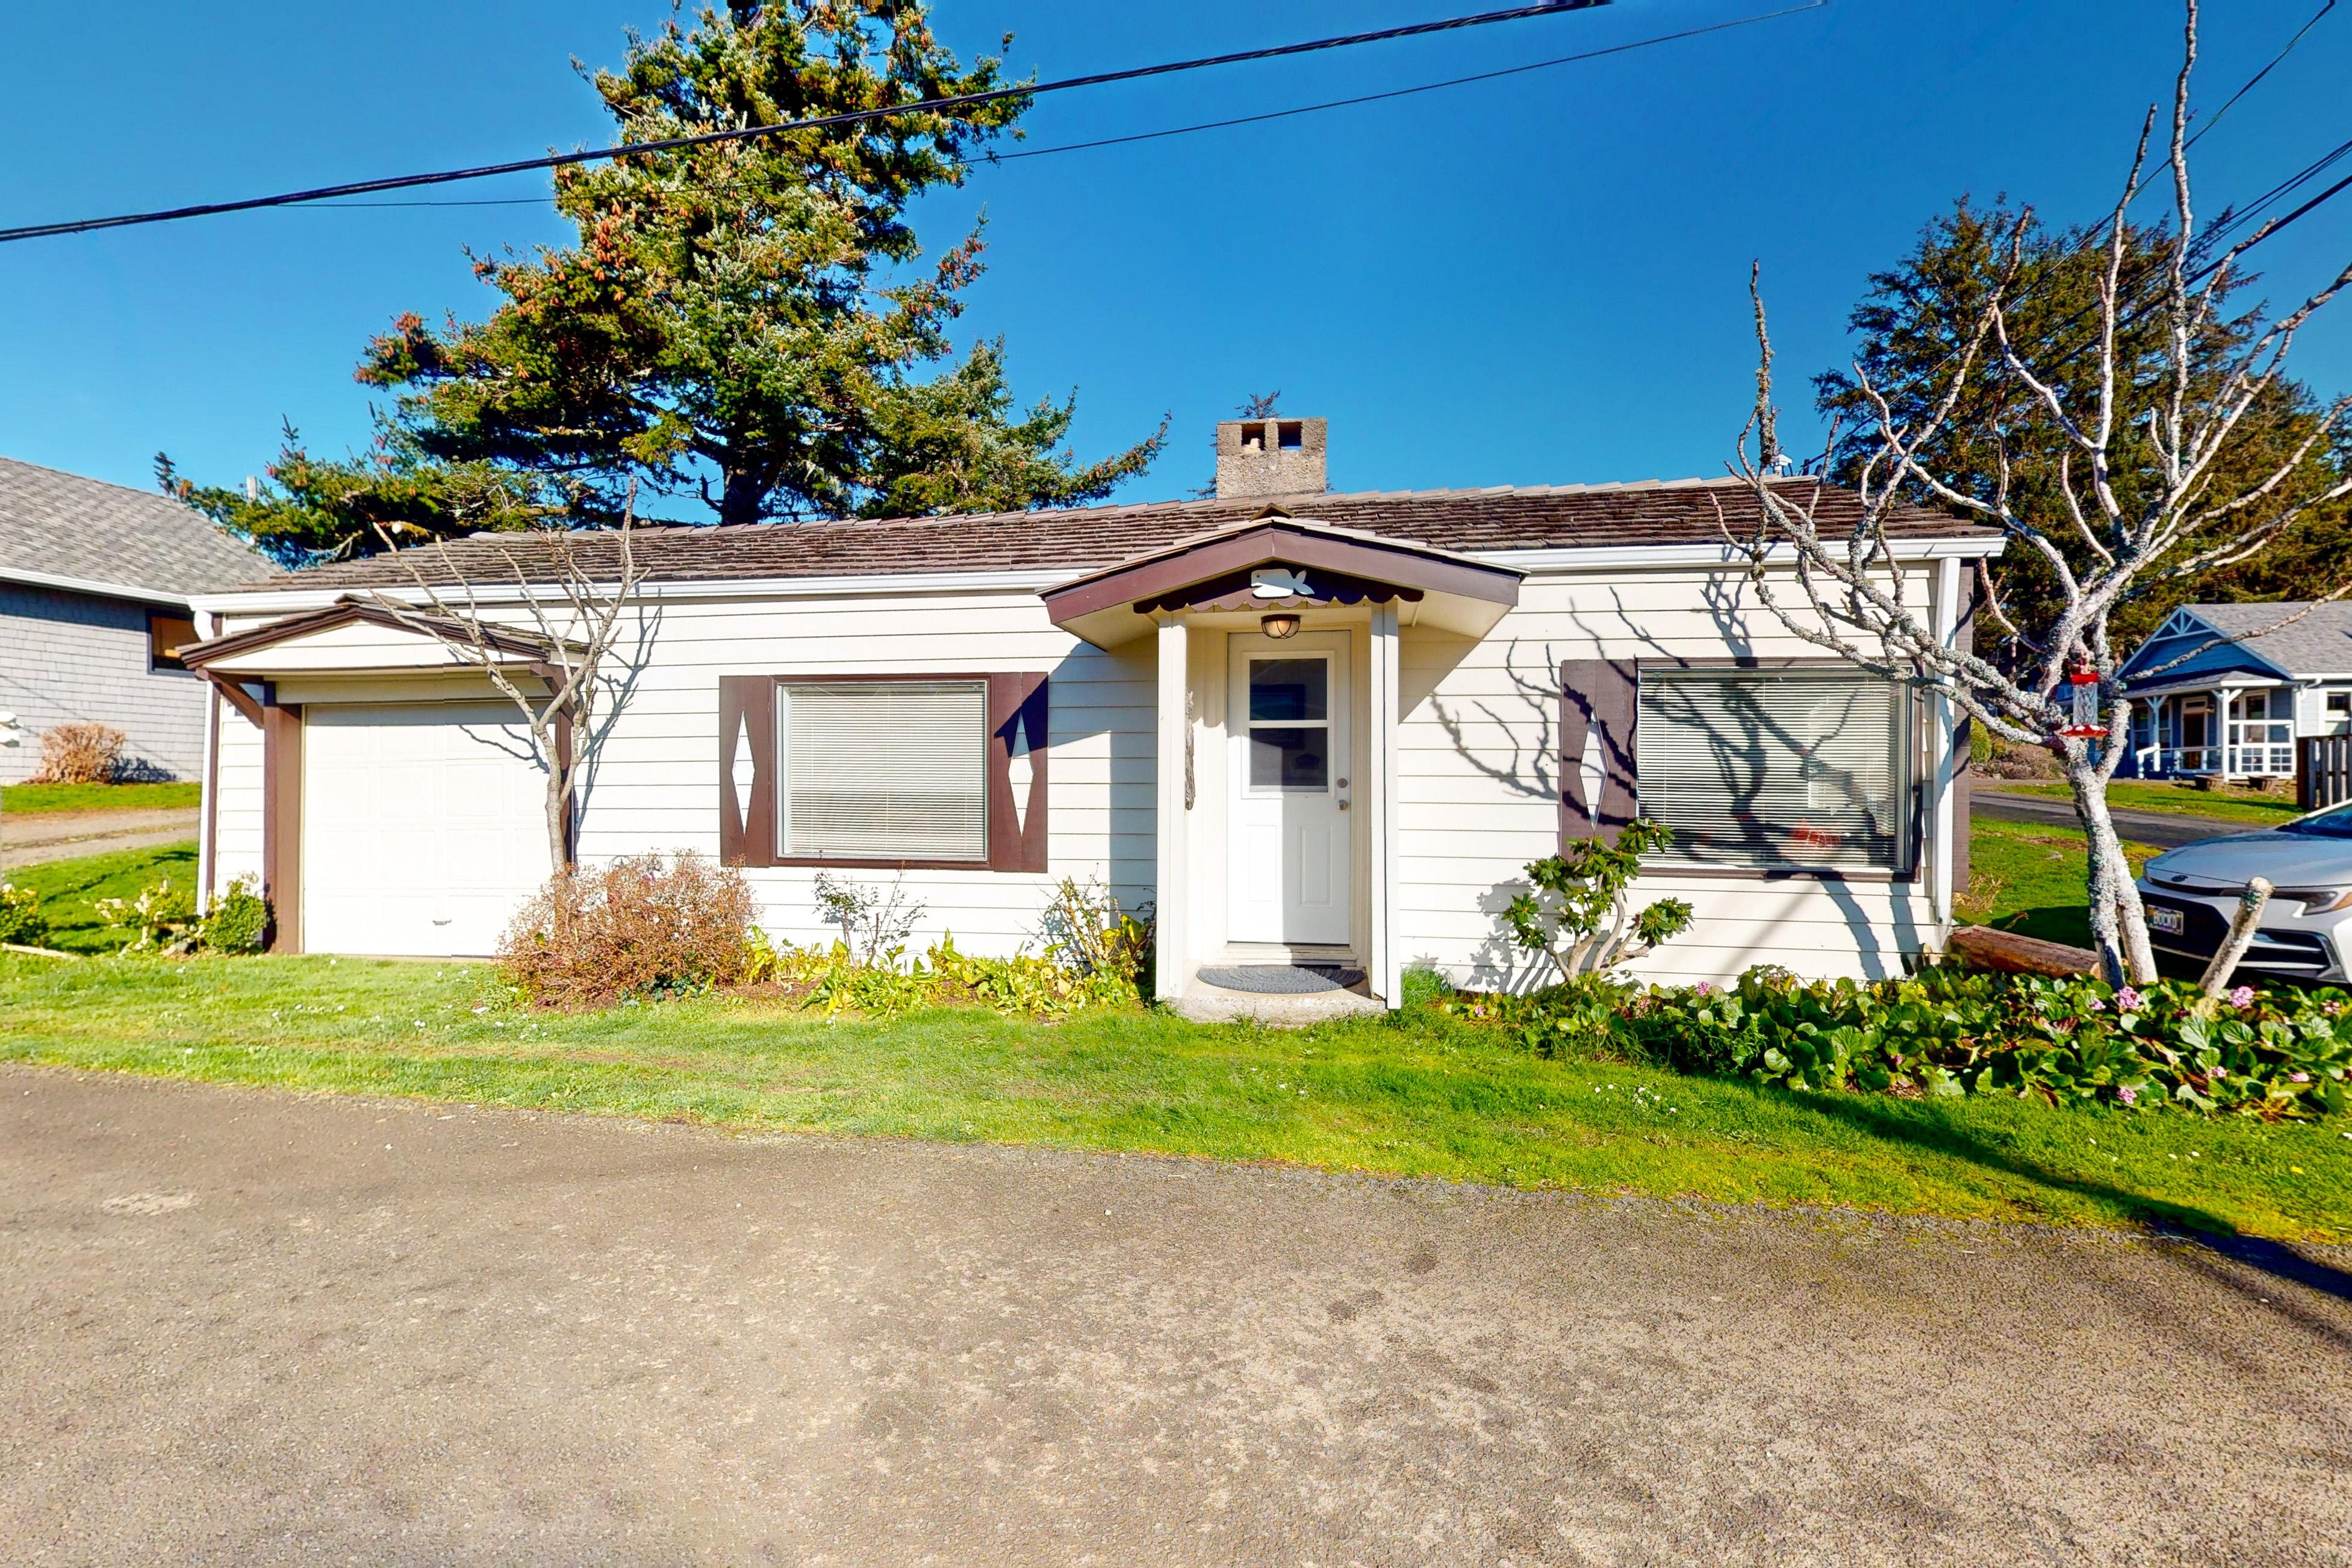 Property Image 1 - Crab Ave. 2